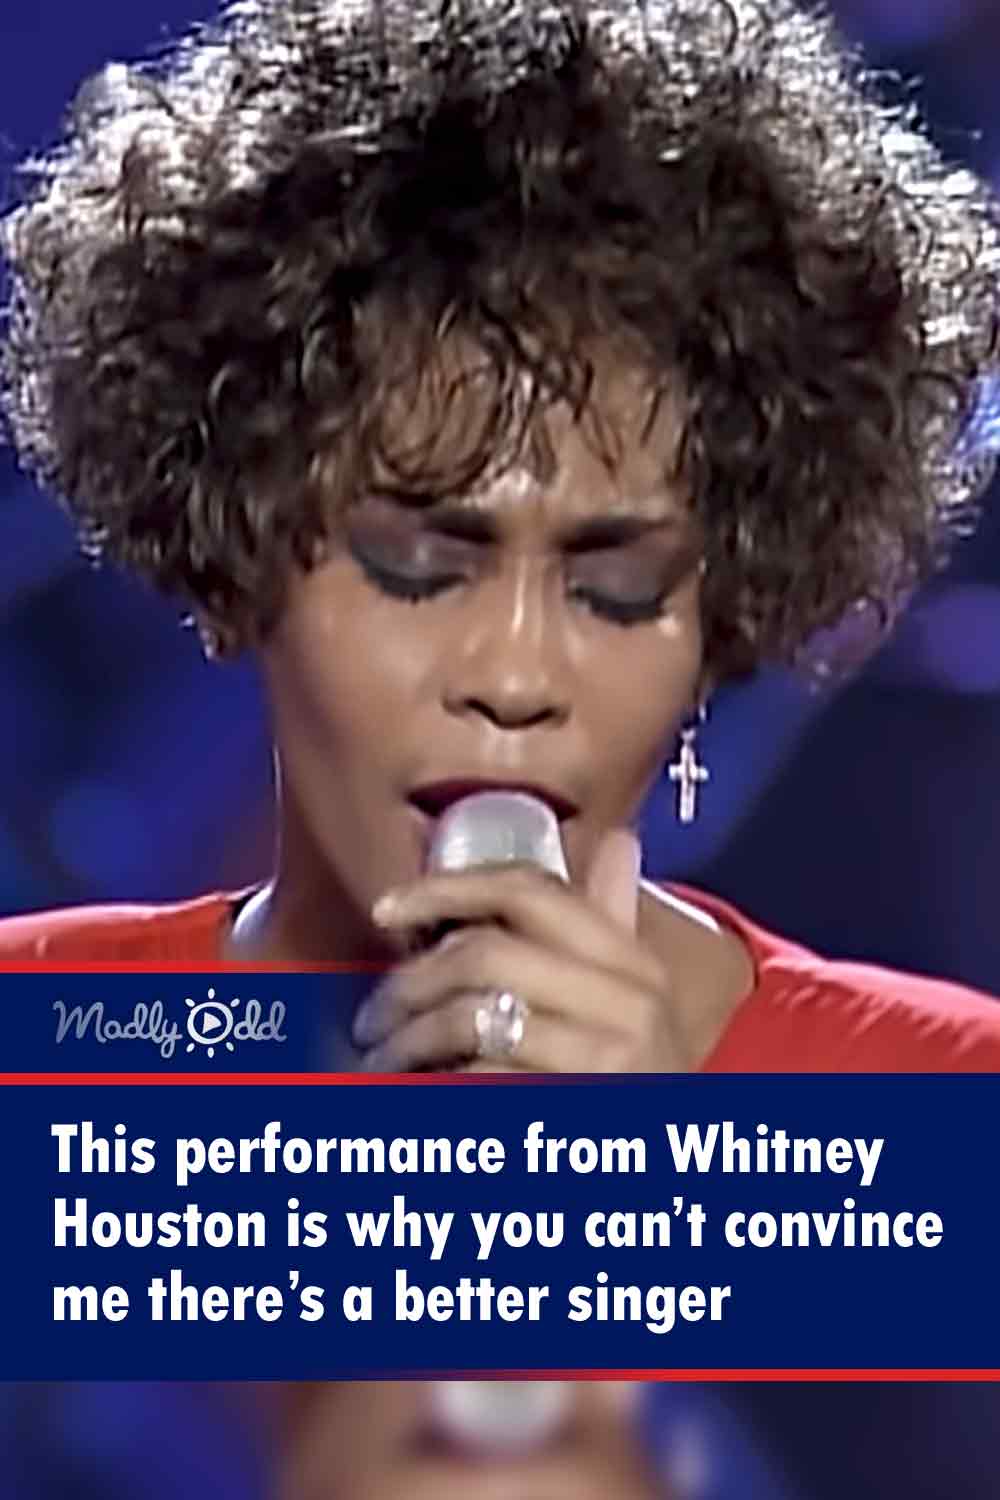 Whitney Houston welcomed back United States soldiers returning from the Gulf War in style